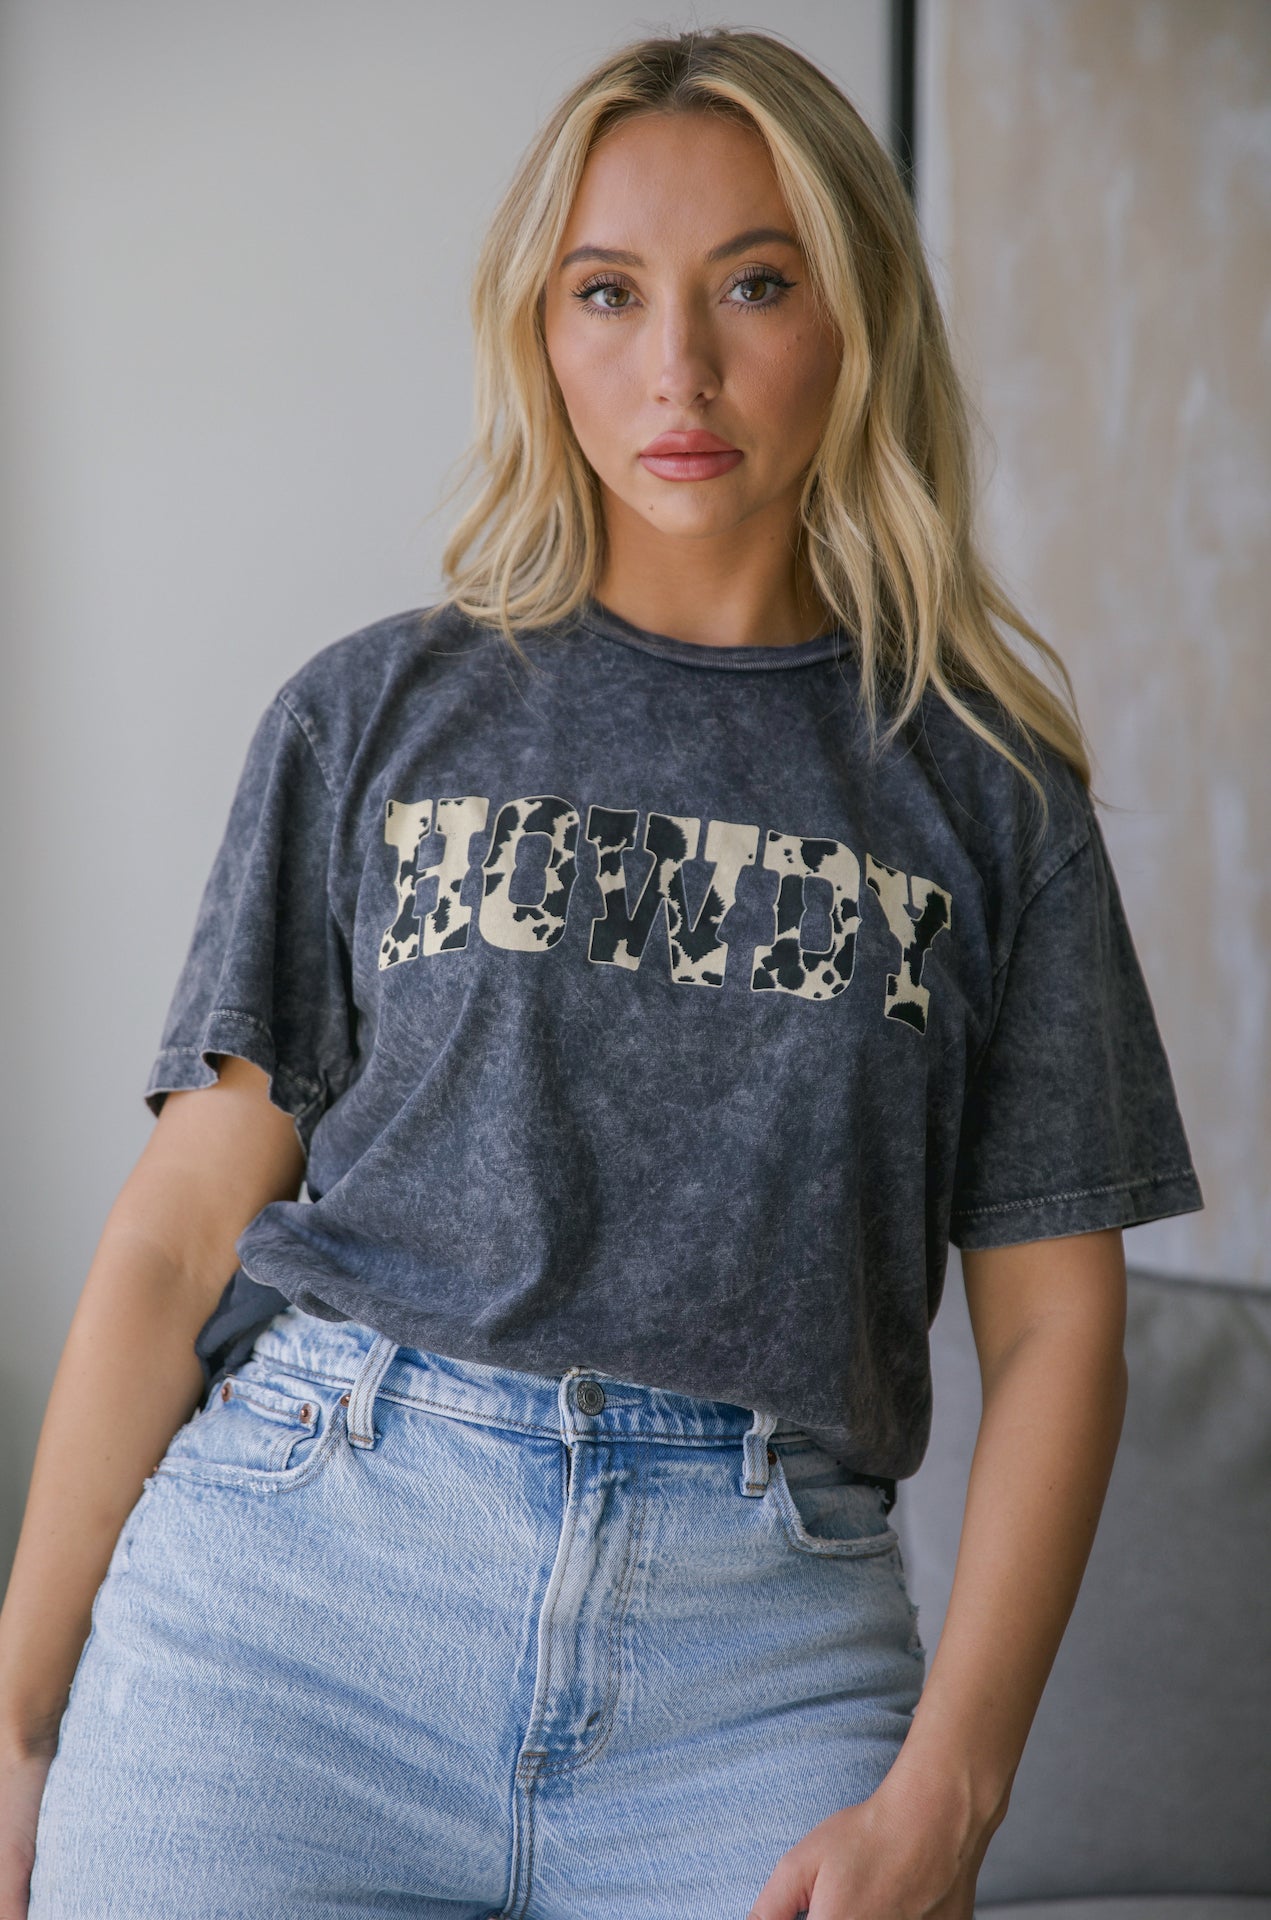 howdy cow print graphic tee on grey mineral wash tee